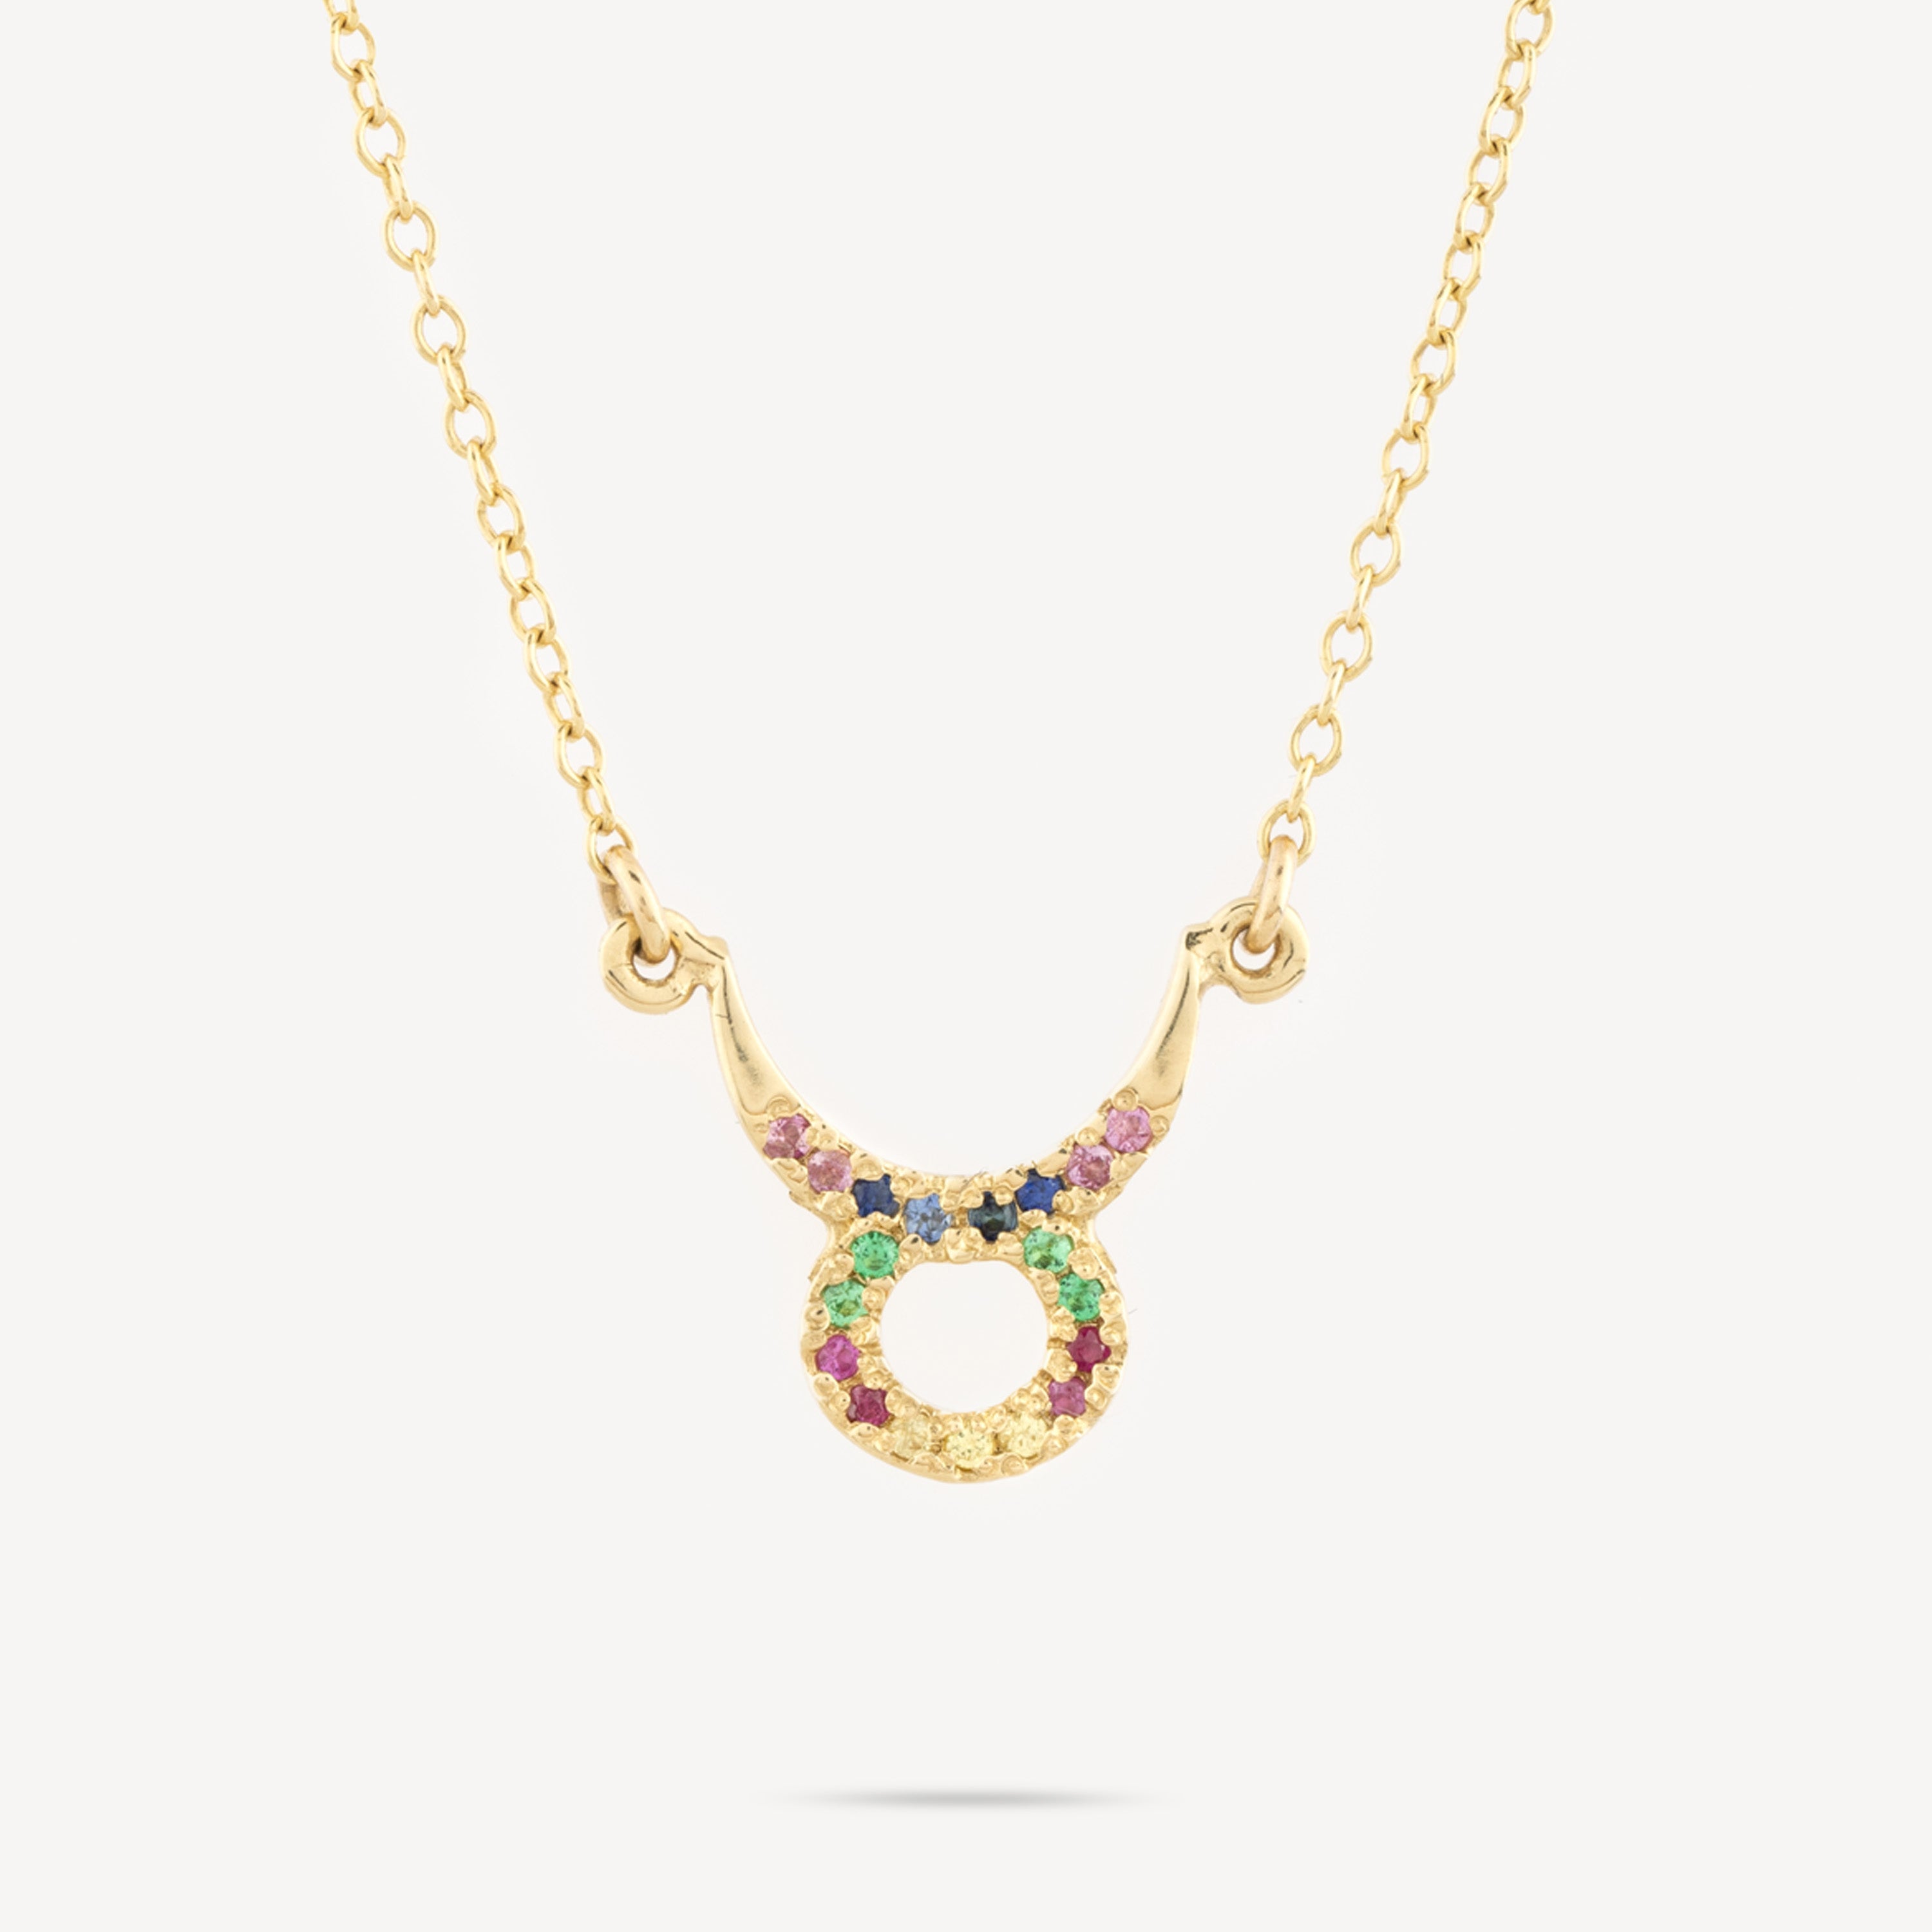 Aries Zodiac Necklace with Multicolored Sapphires